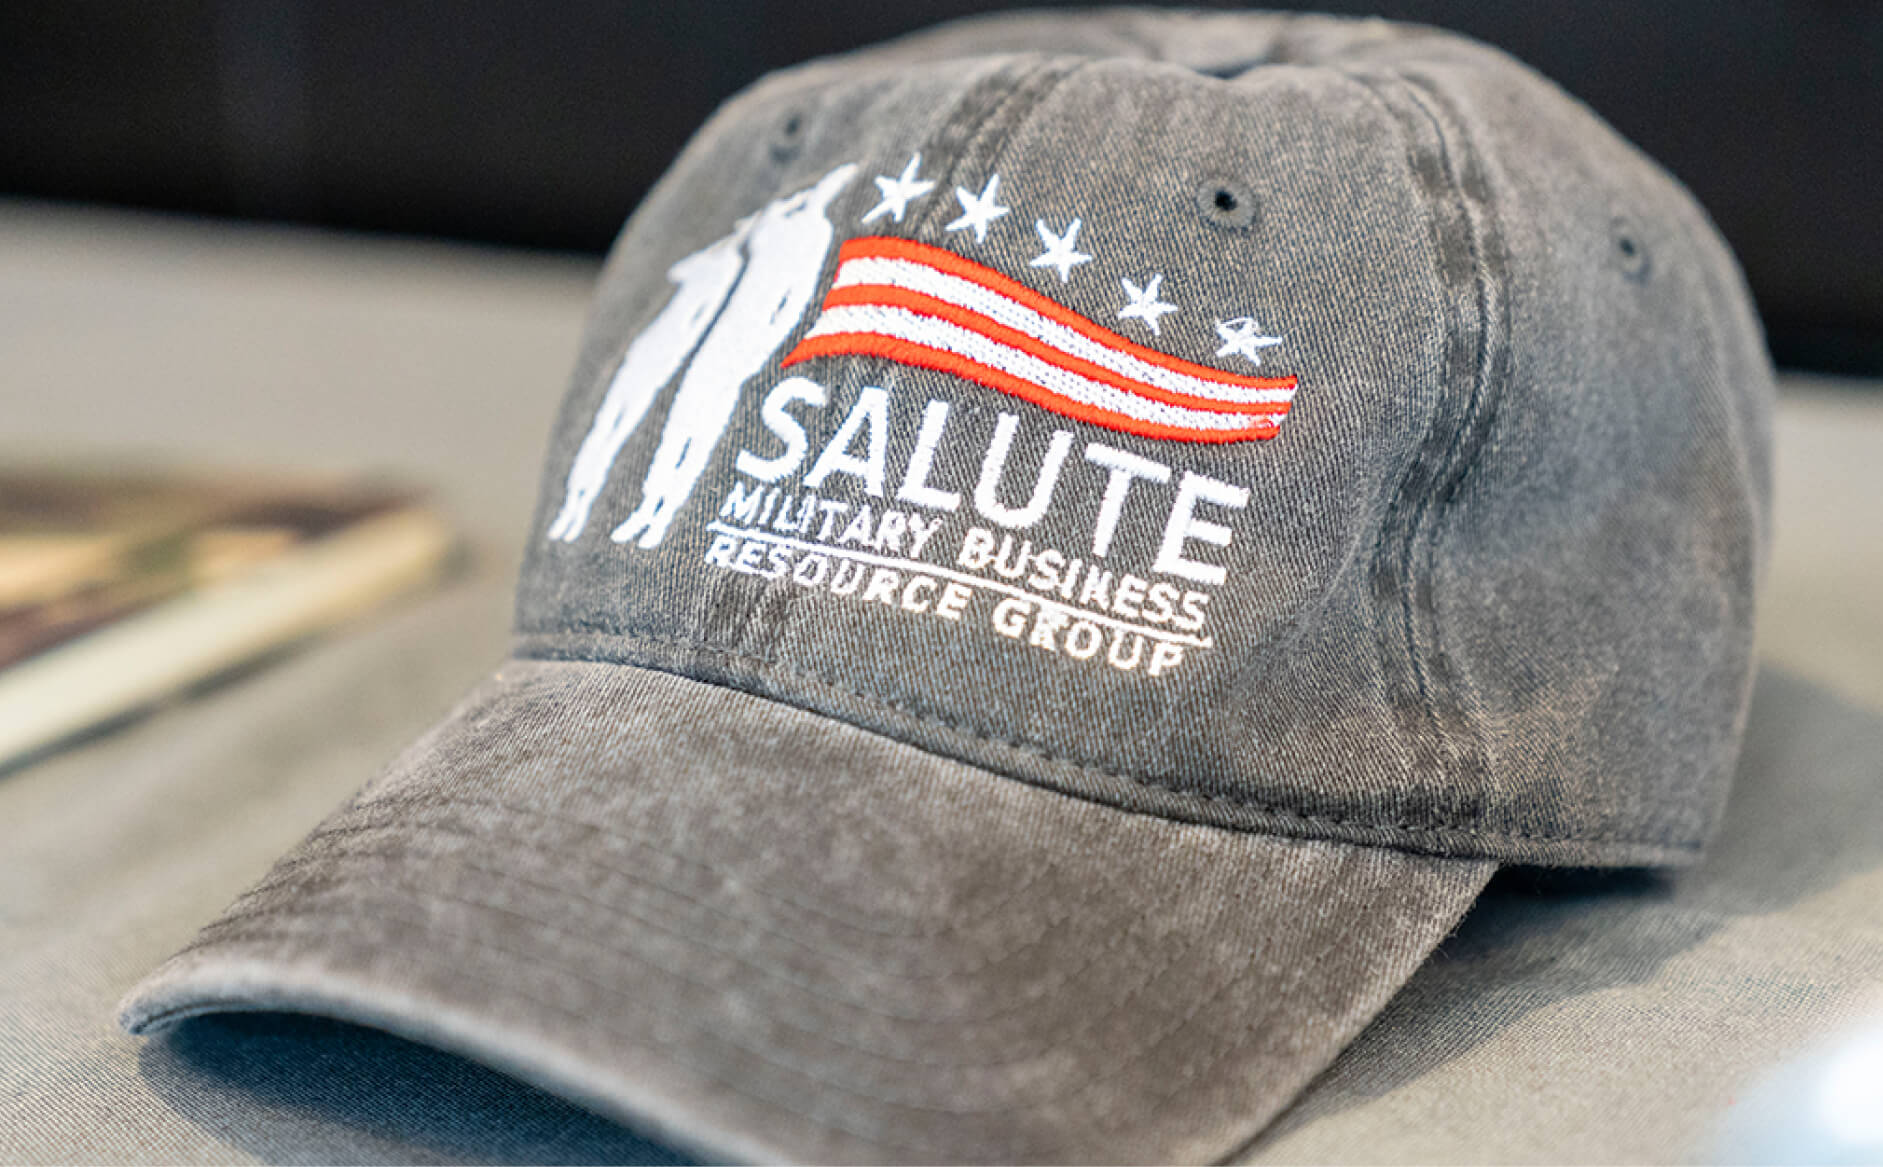 Gray ballcap with logo of white silhouette of two soldiers standing at attention, with flag logo and wording that says 